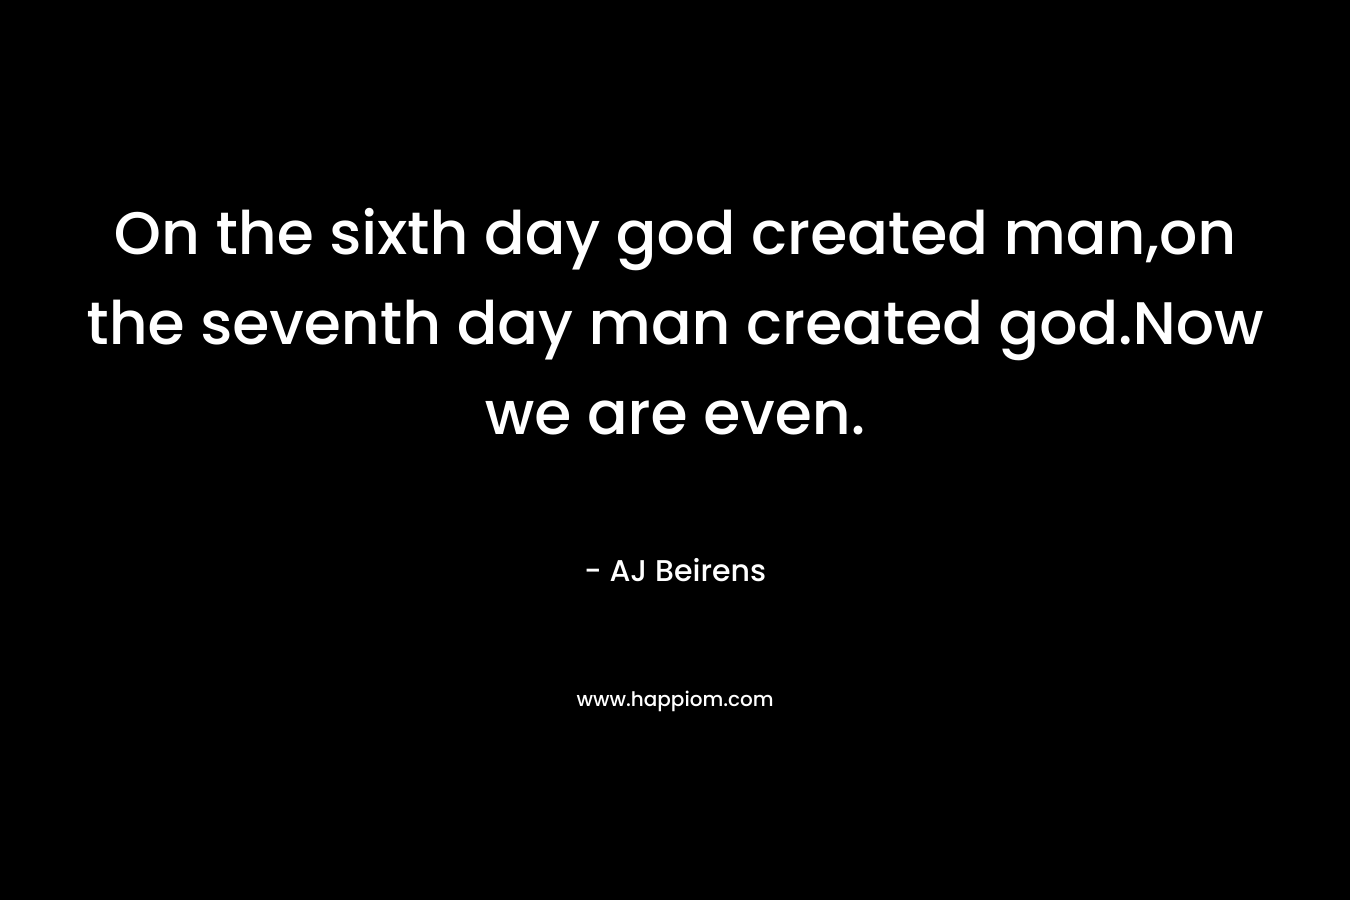 On the sixth day god created man,on the seventh day man created god.Now we are even.